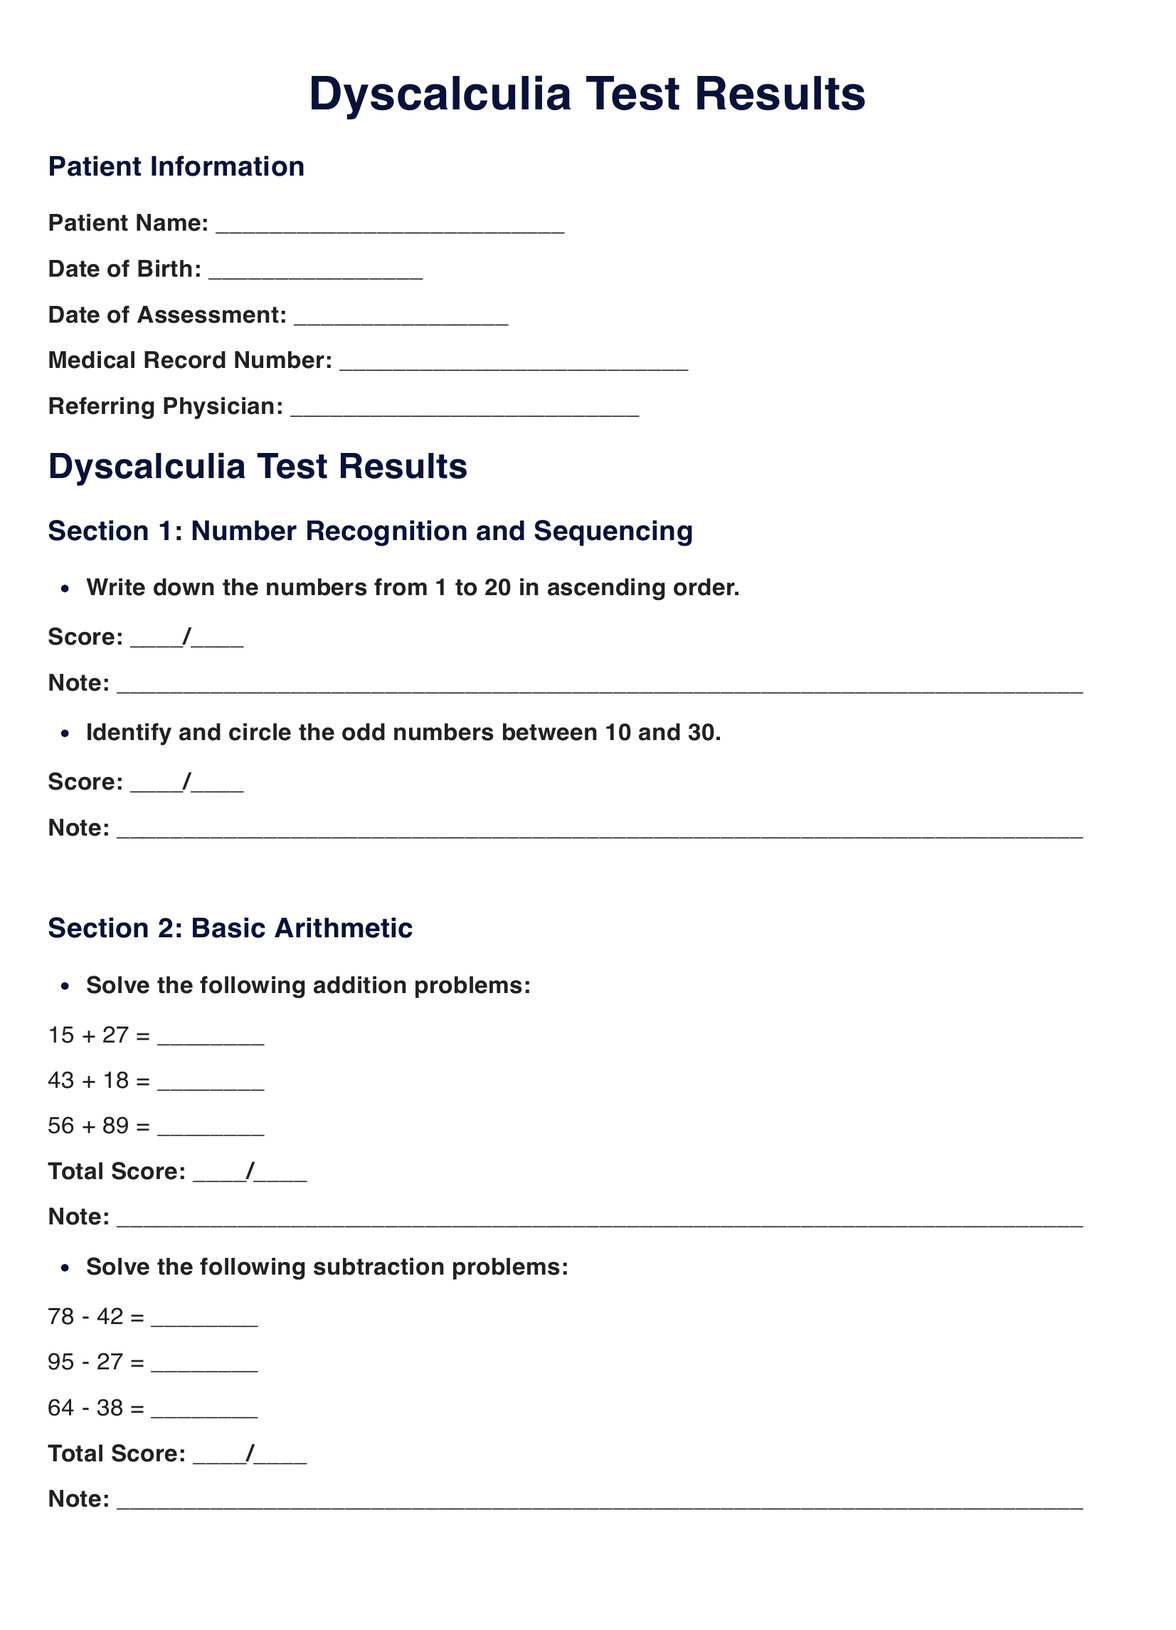 Test for Dyscalculia PDF Example